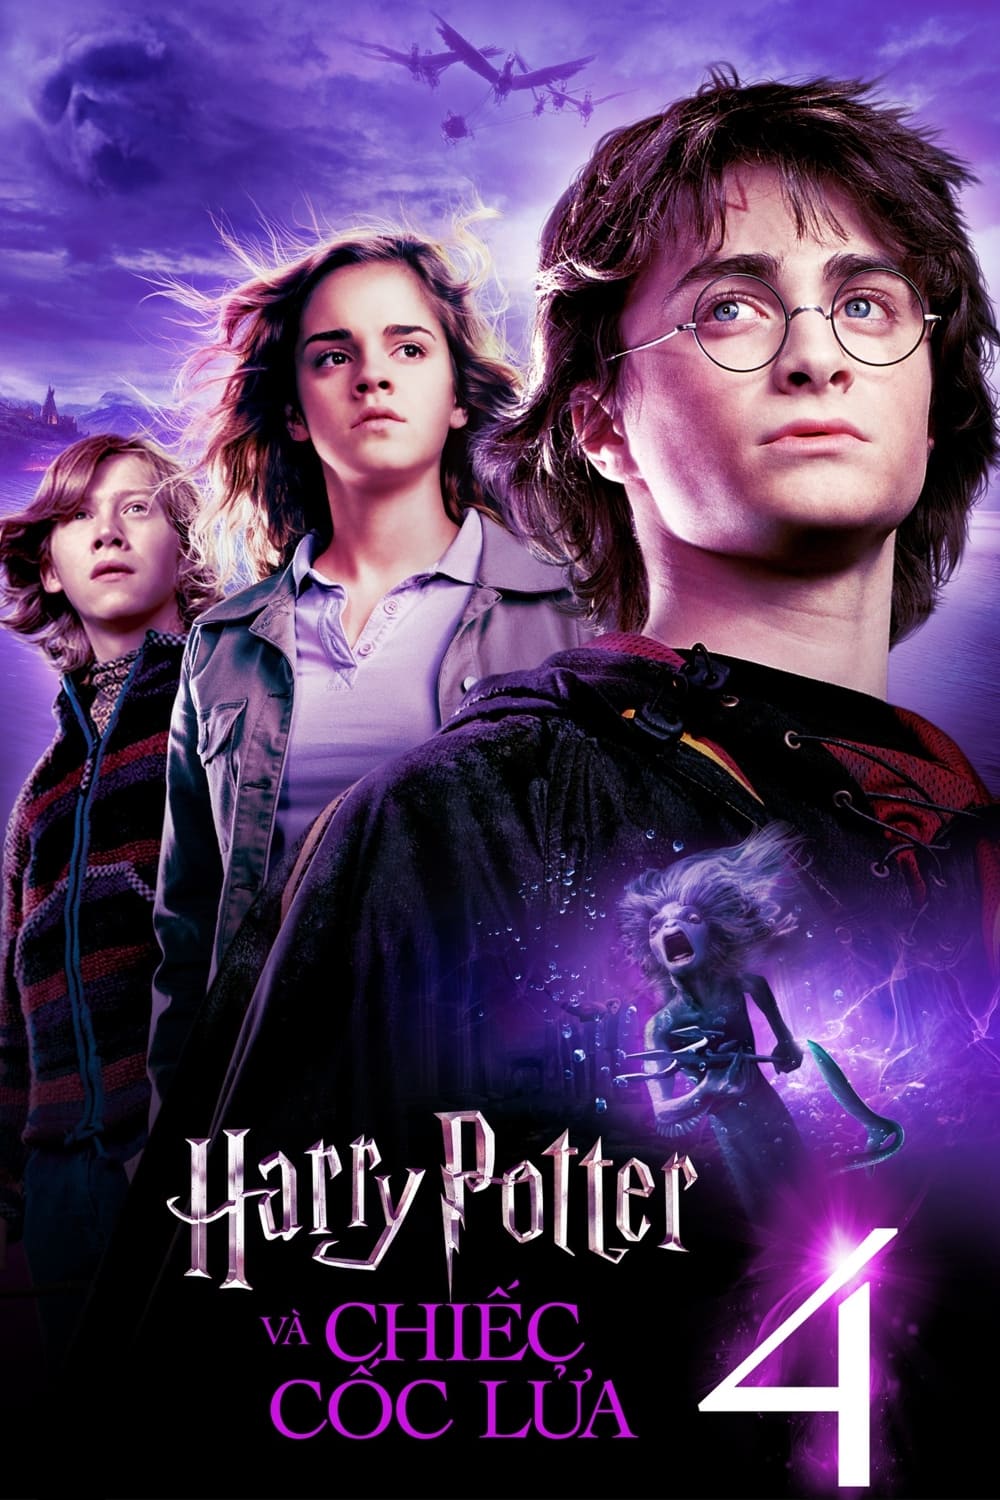 Harry Potter và Chiếc Cốc Lửa (Harry Potter and the Goblet of Fire) [2005]